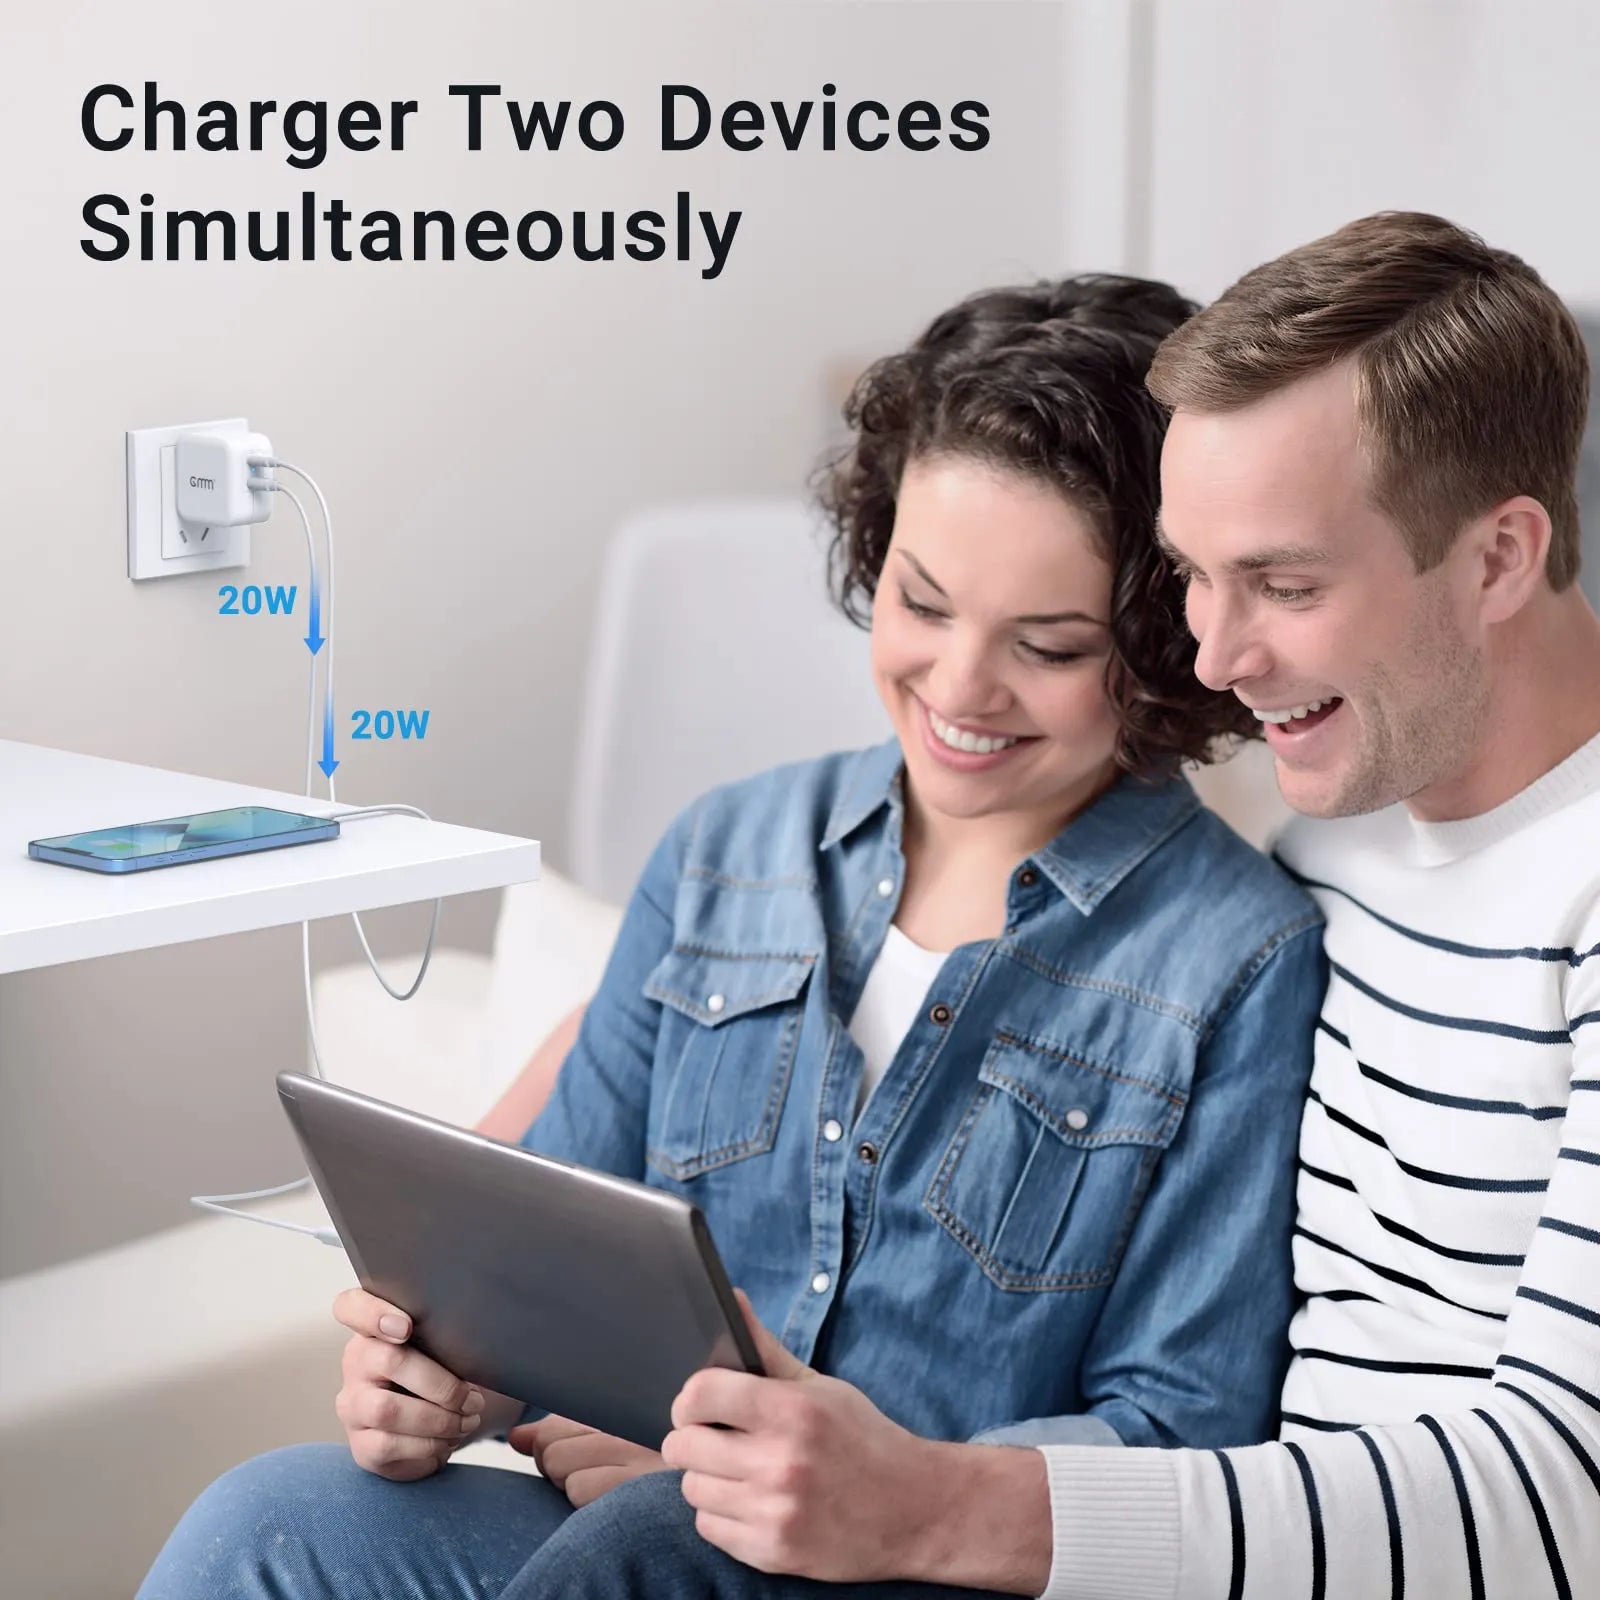 GMM Dual USB C Wall Charger 40W for iPhone